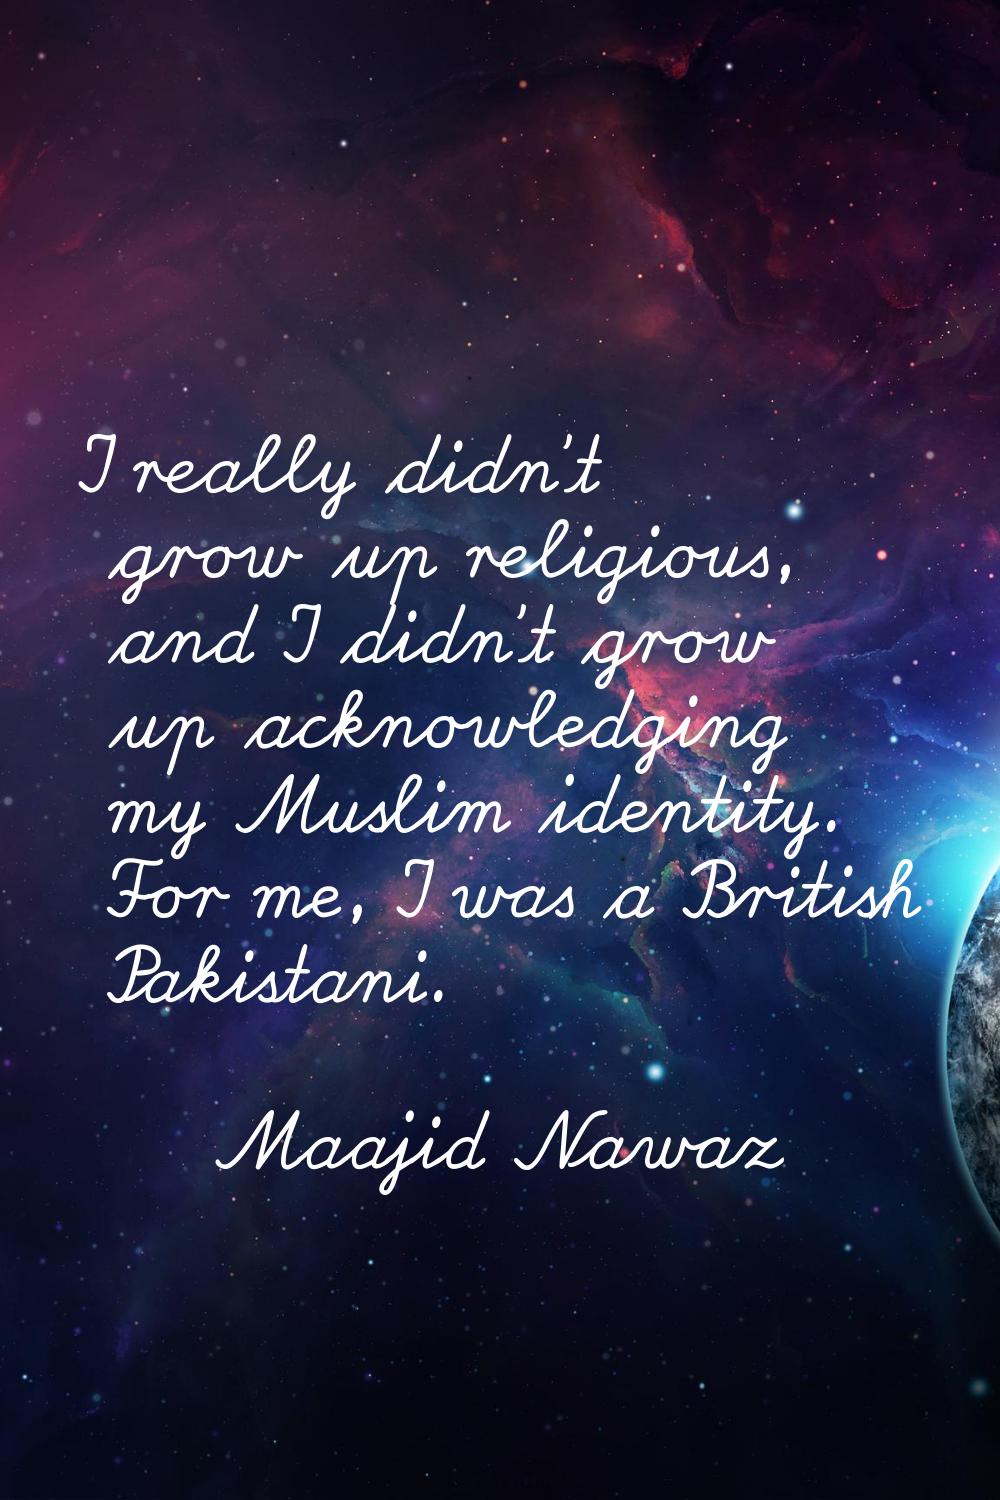 I really didn't grow up religious, and I didn't grow up acknowledging my Muslim identity. For me, I